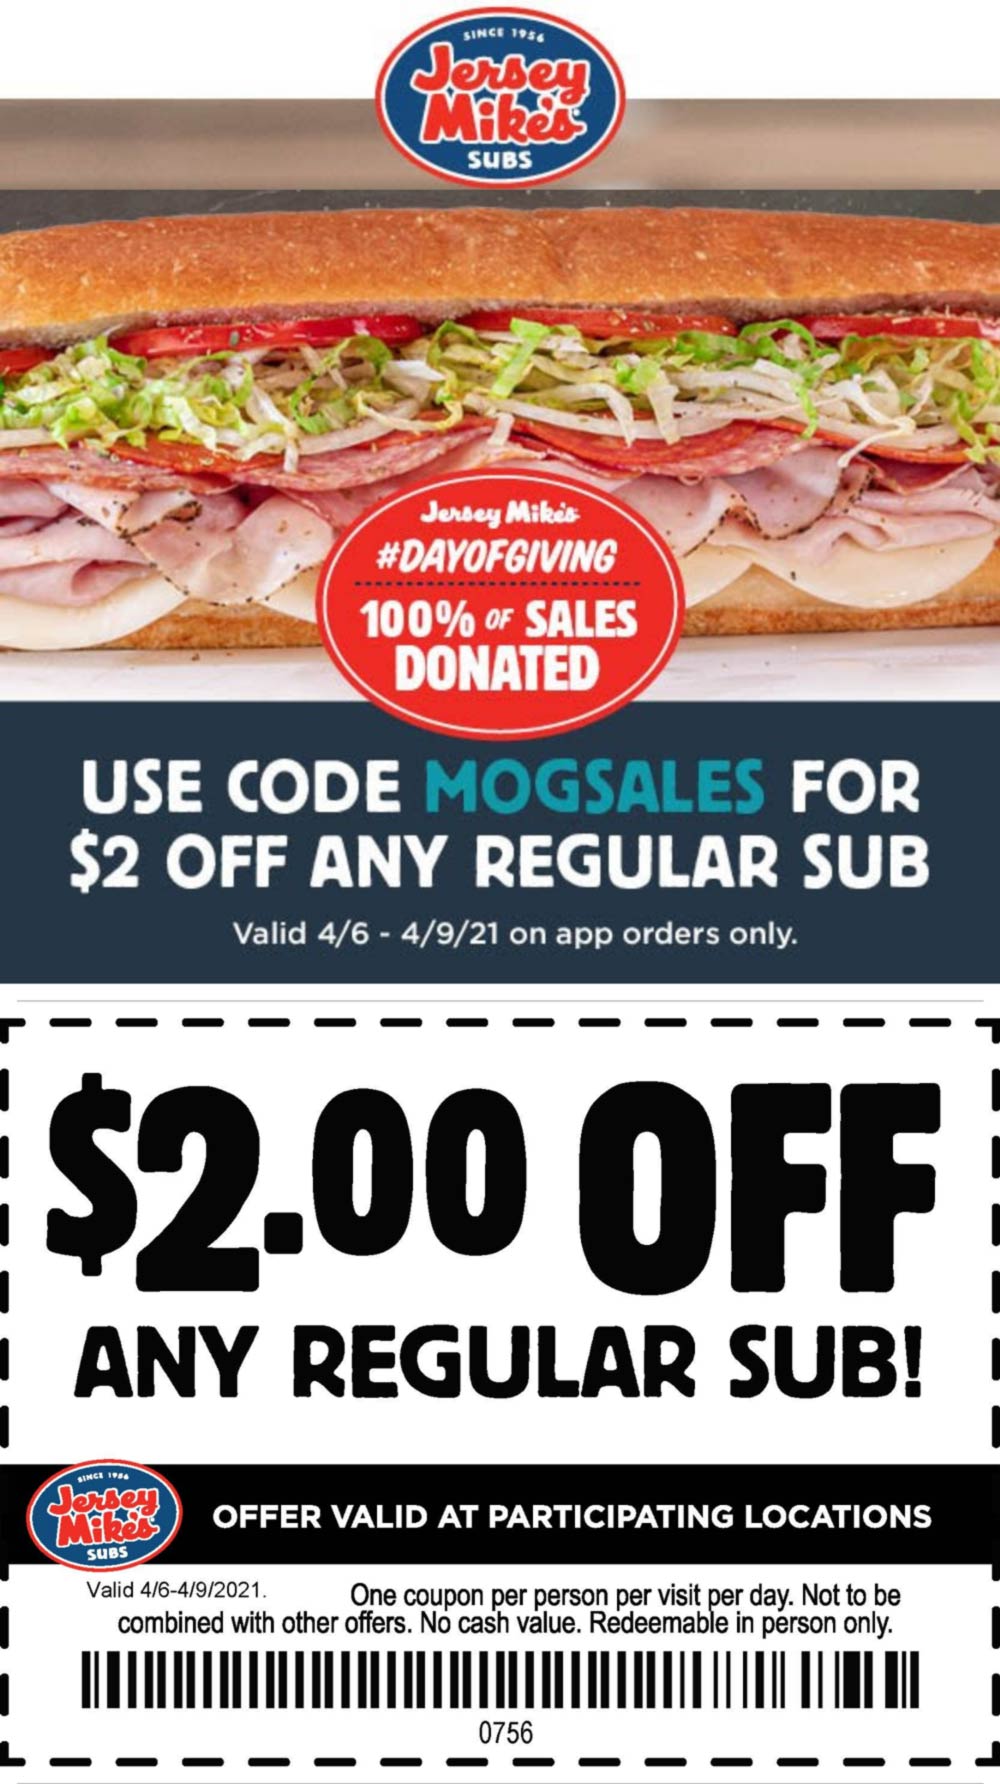 2 off a sub sandwich at Jersey Mikes, or online via promo code